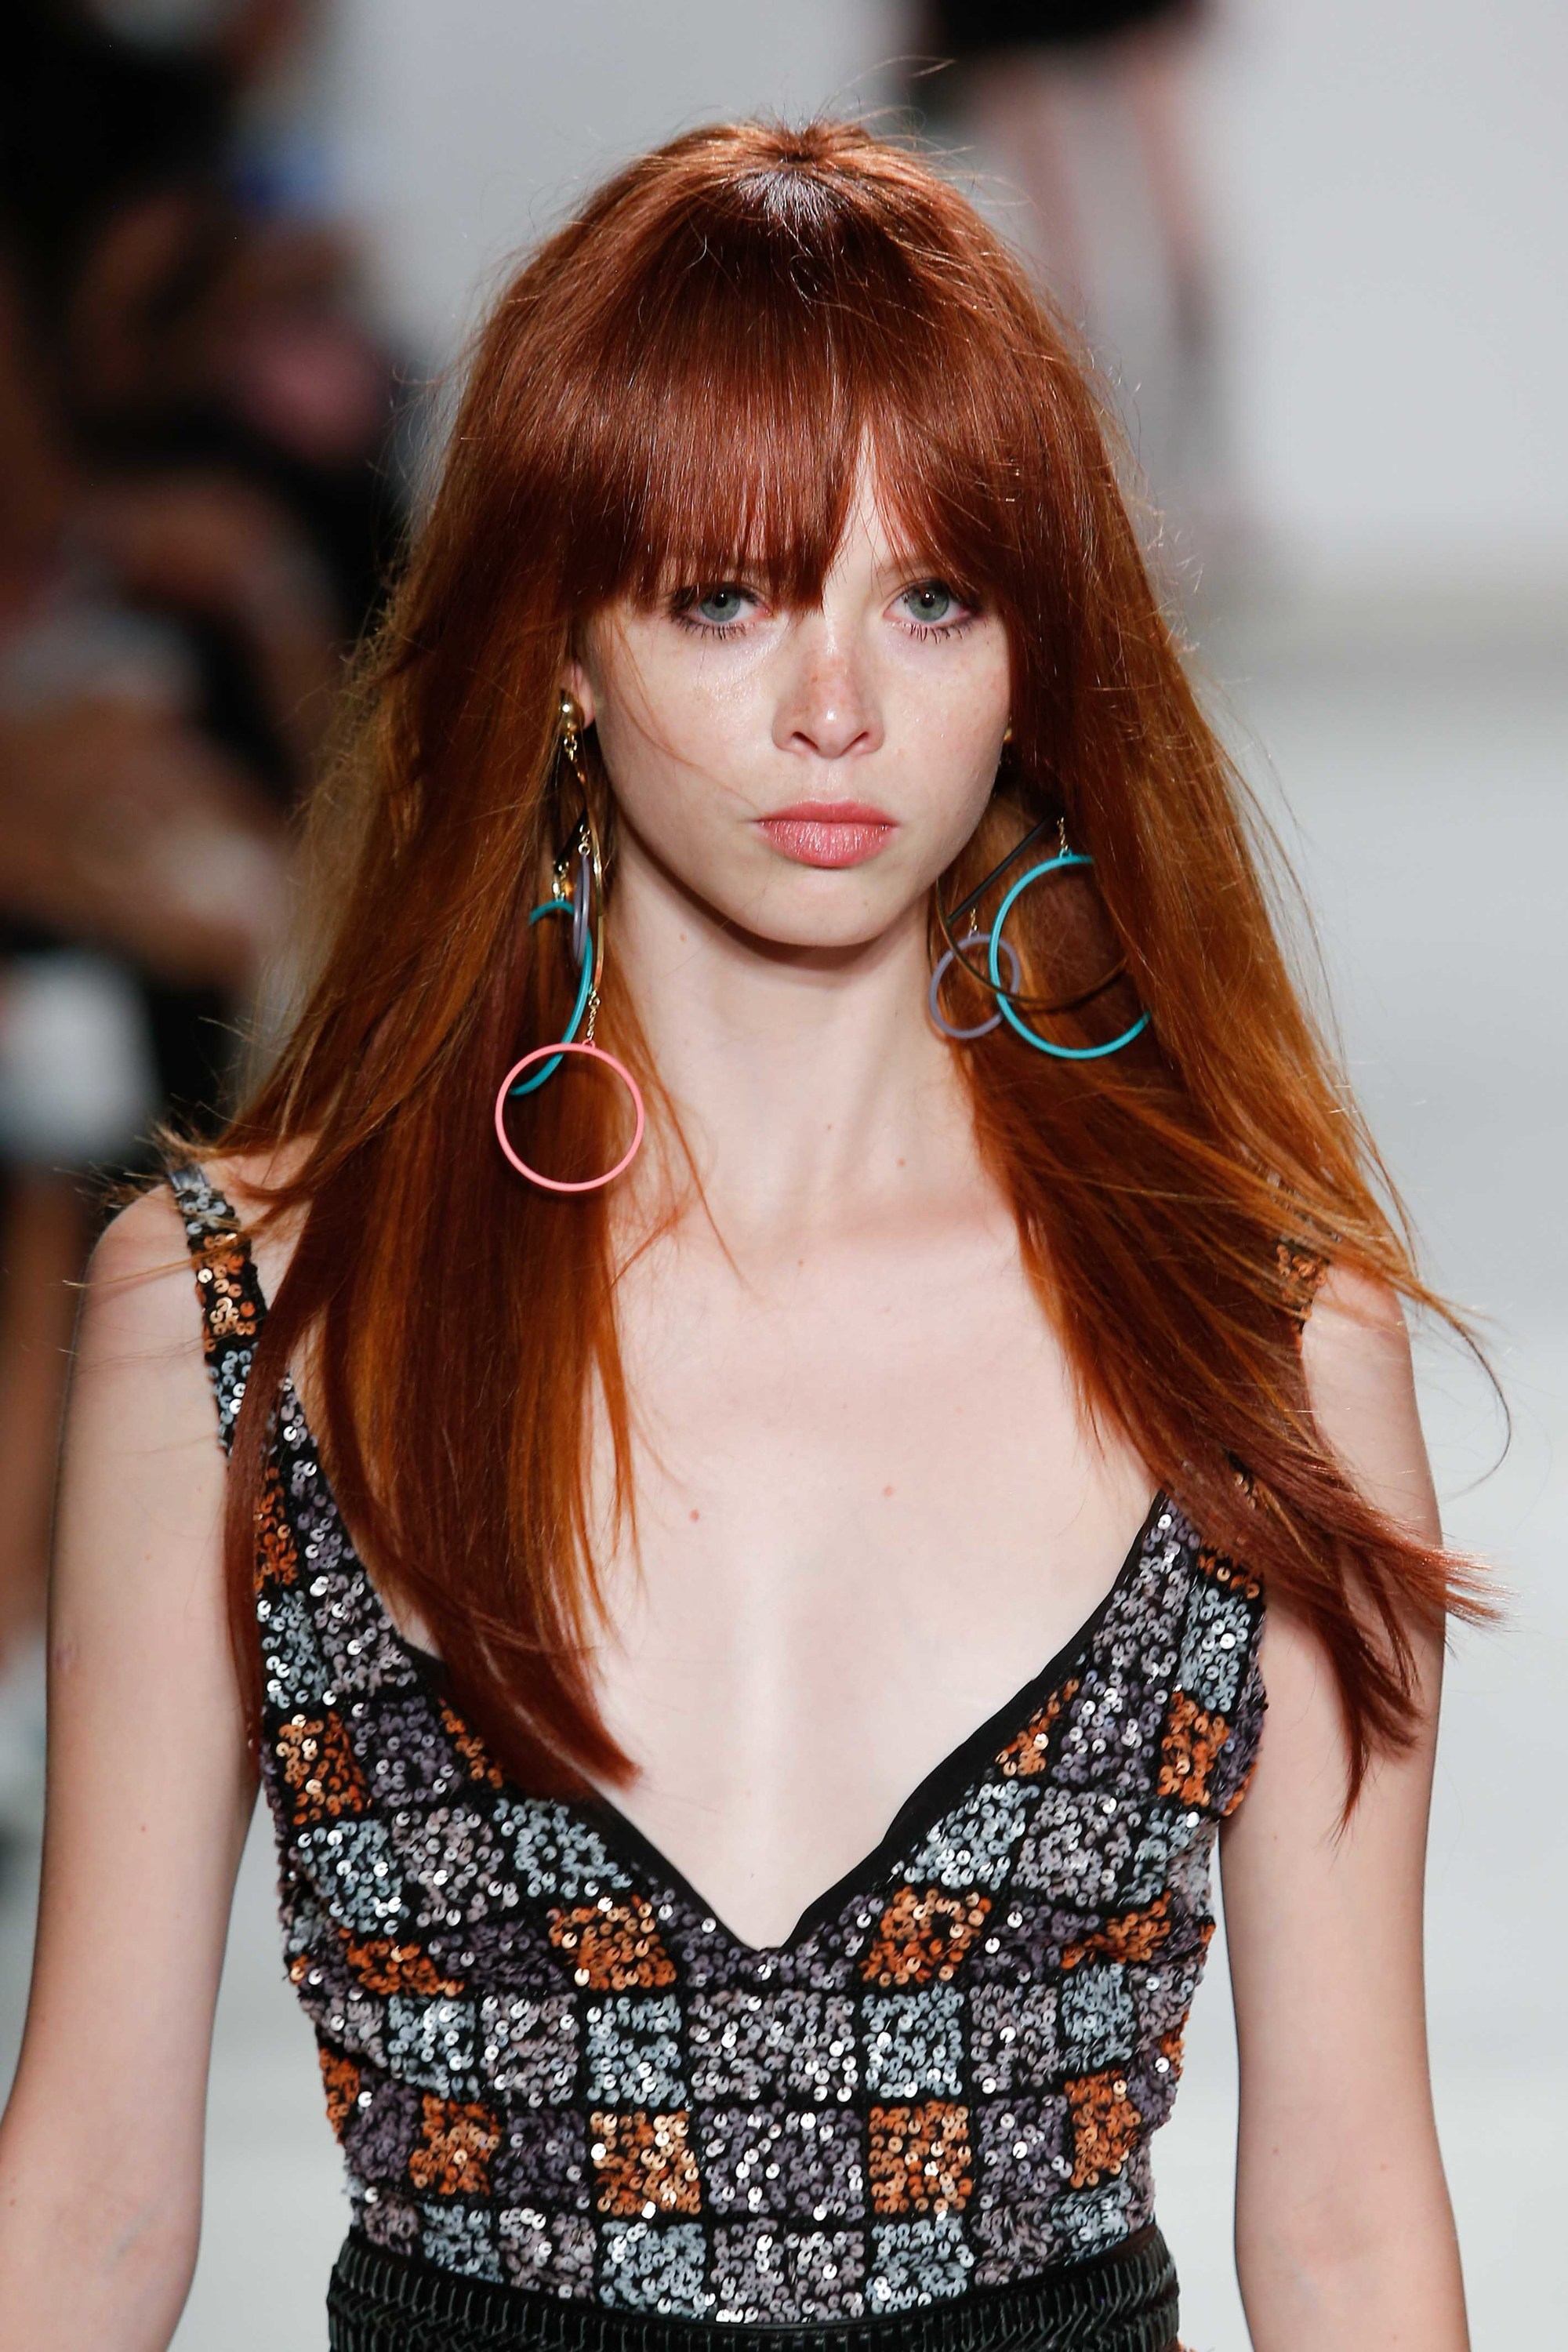 70 Royally Chic Auburn Hair Styles For Your Best Look - Glaminati